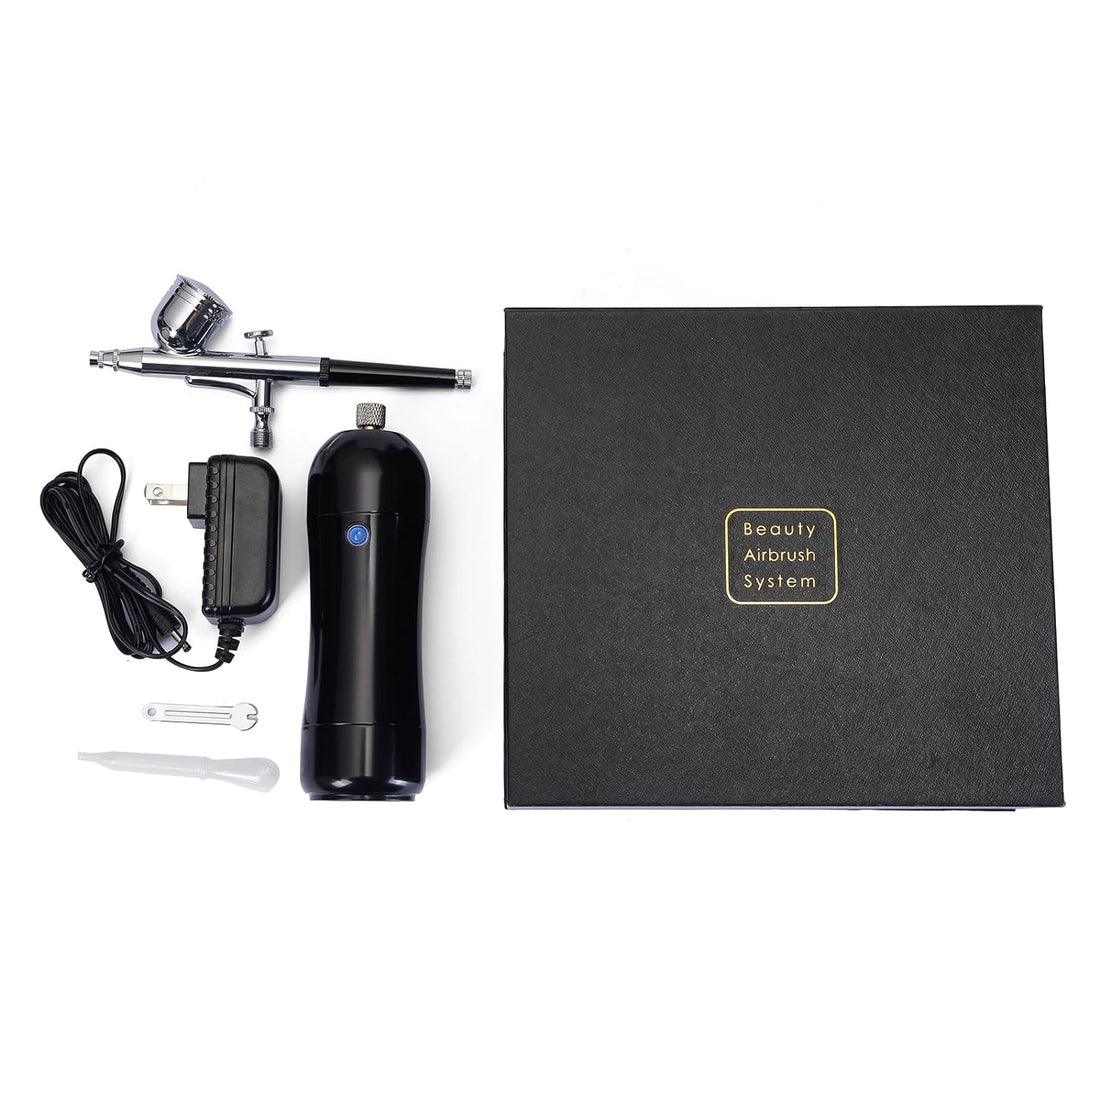 Airbrush-Kit Rechargeable Cordless Airbrush, with Auto Handheld Airbrush Gun and Compressor,Portable Wireless Air Brush for Nail Art, Makeup, Painting Art, Barber, Cake Decorating